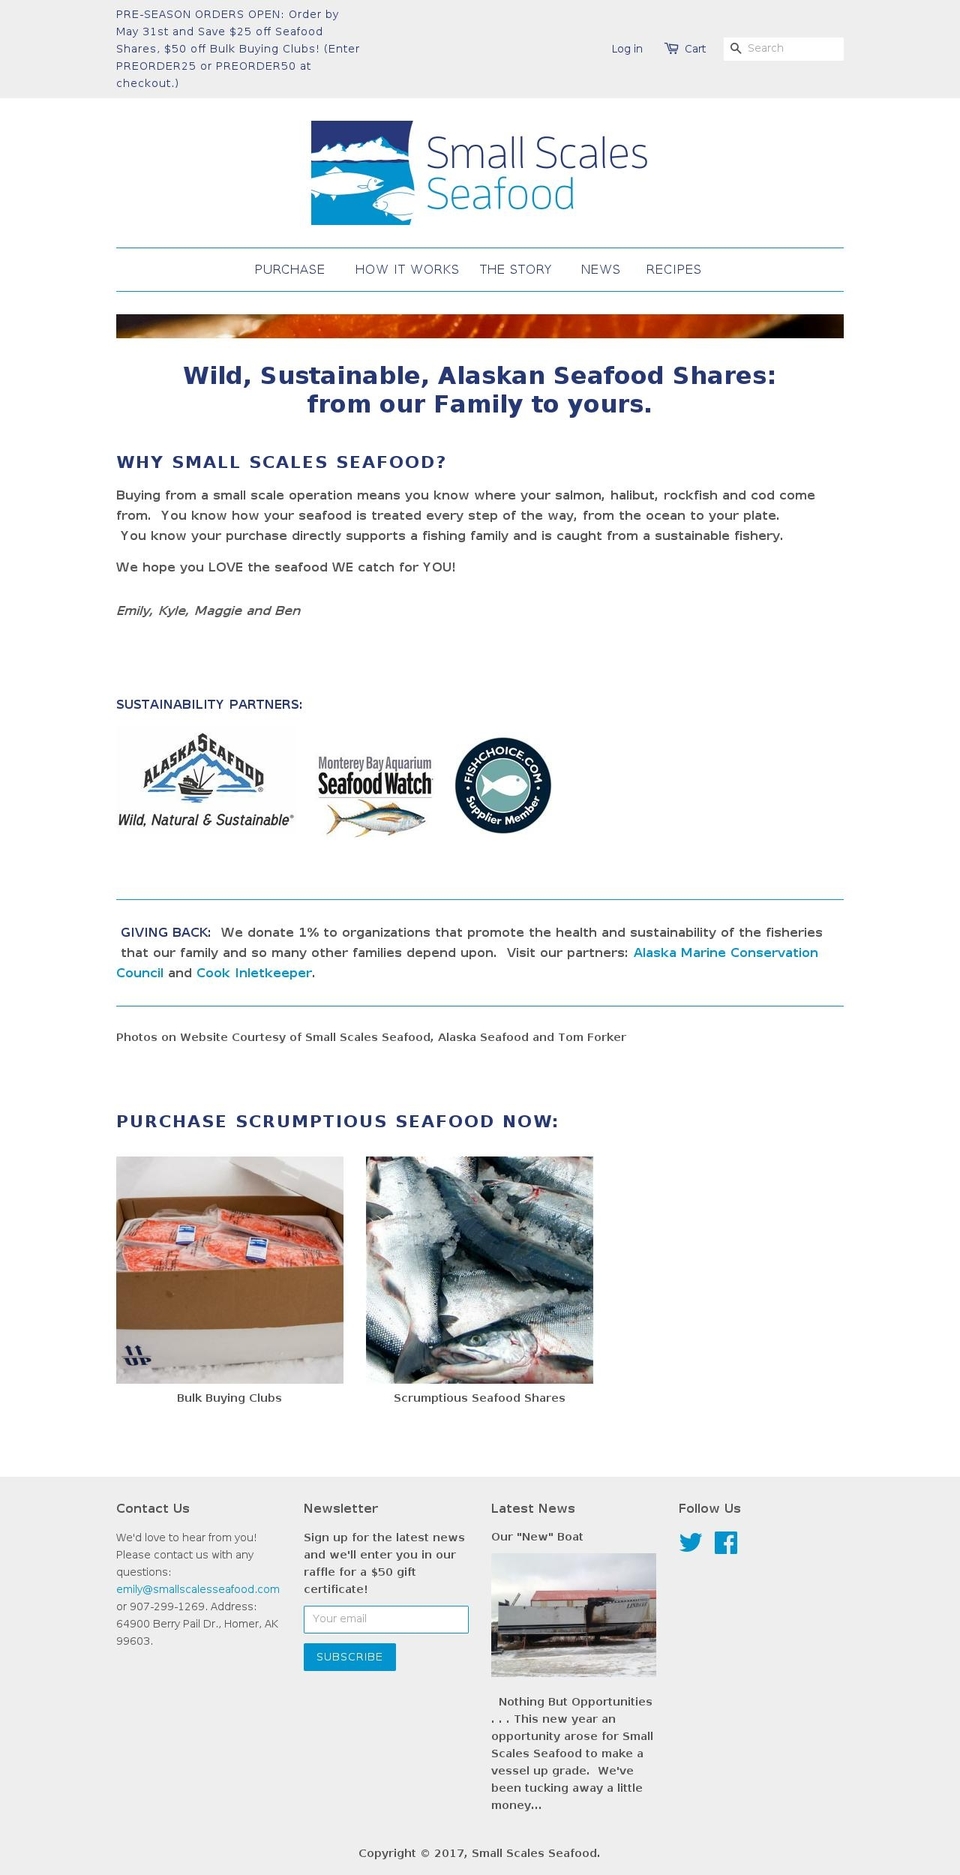 Providence Shopify theme site example smallscalesseafood.com